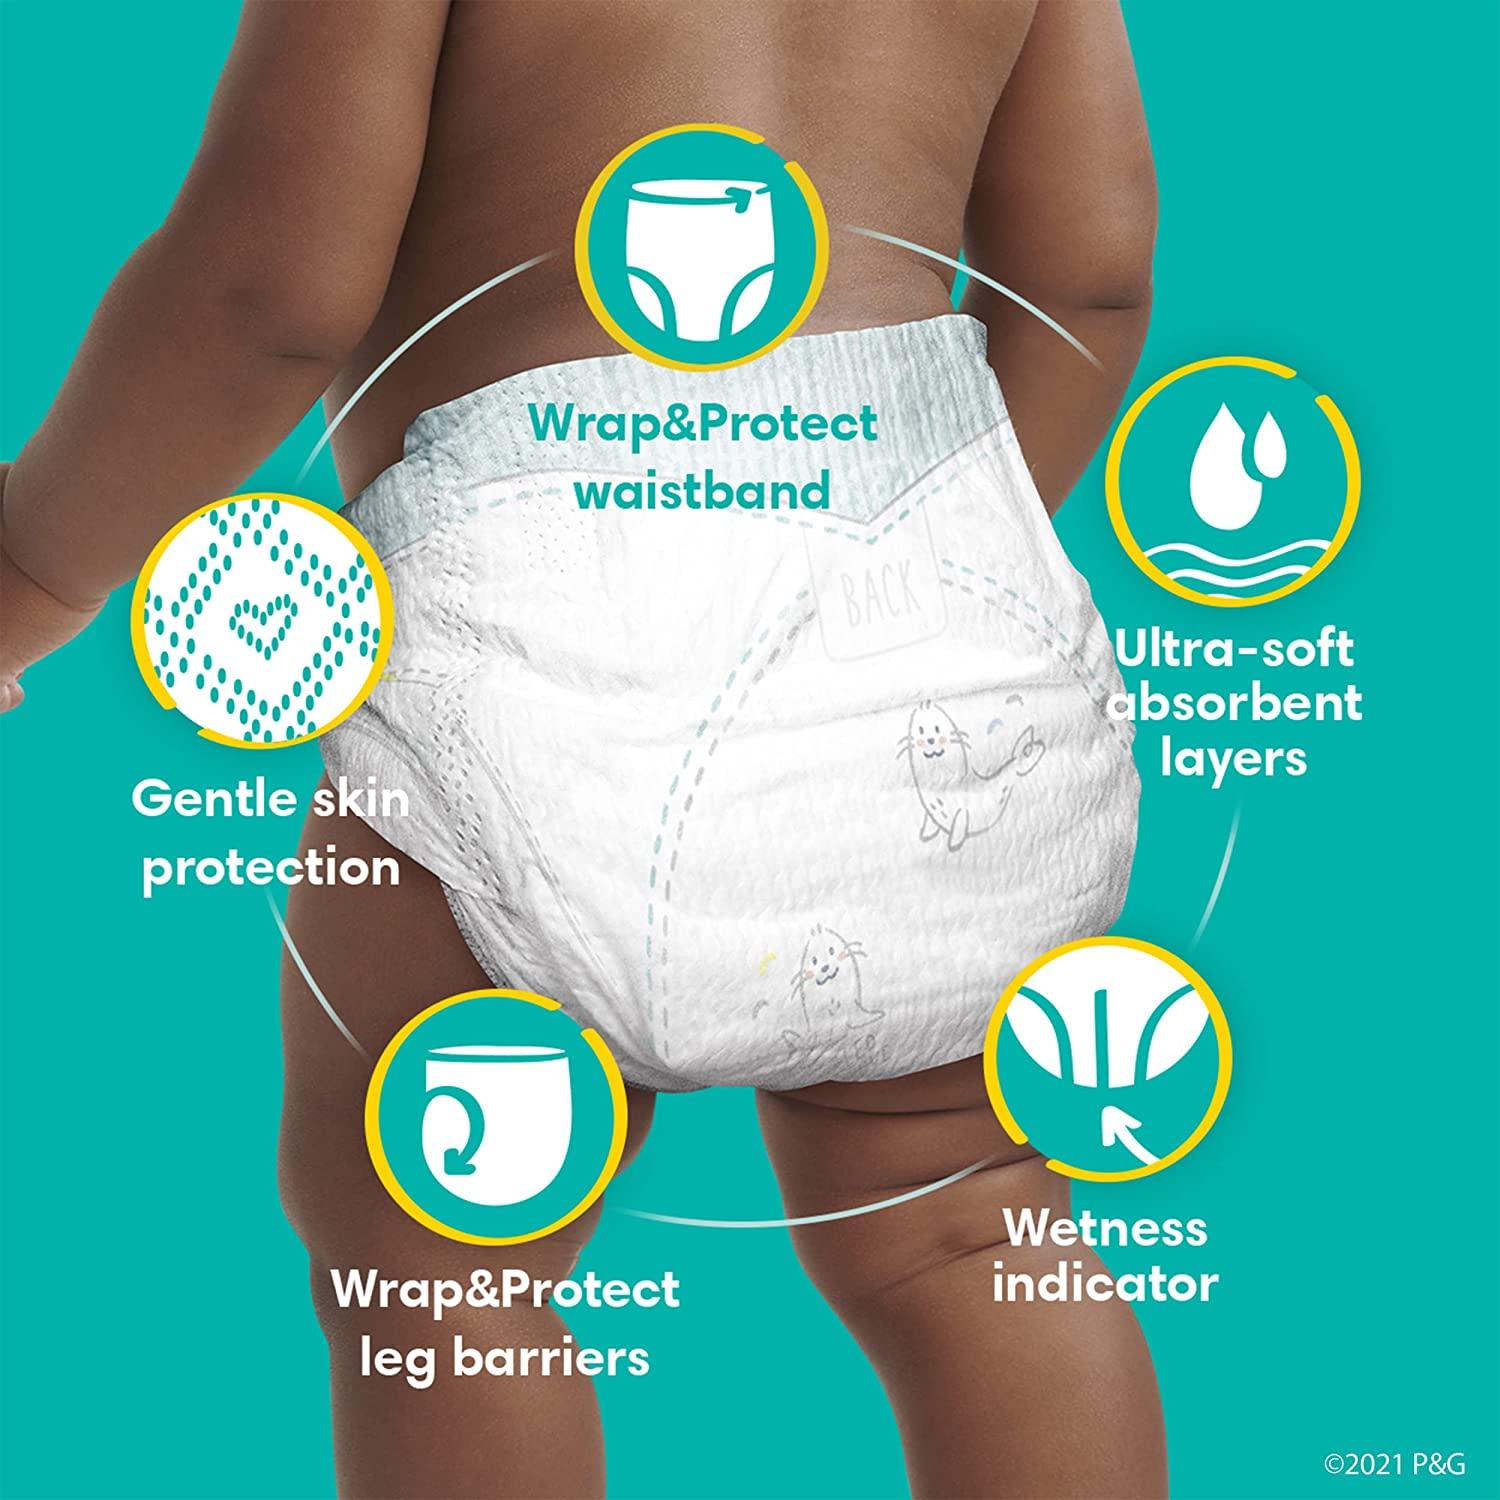 pampers disposable diapers